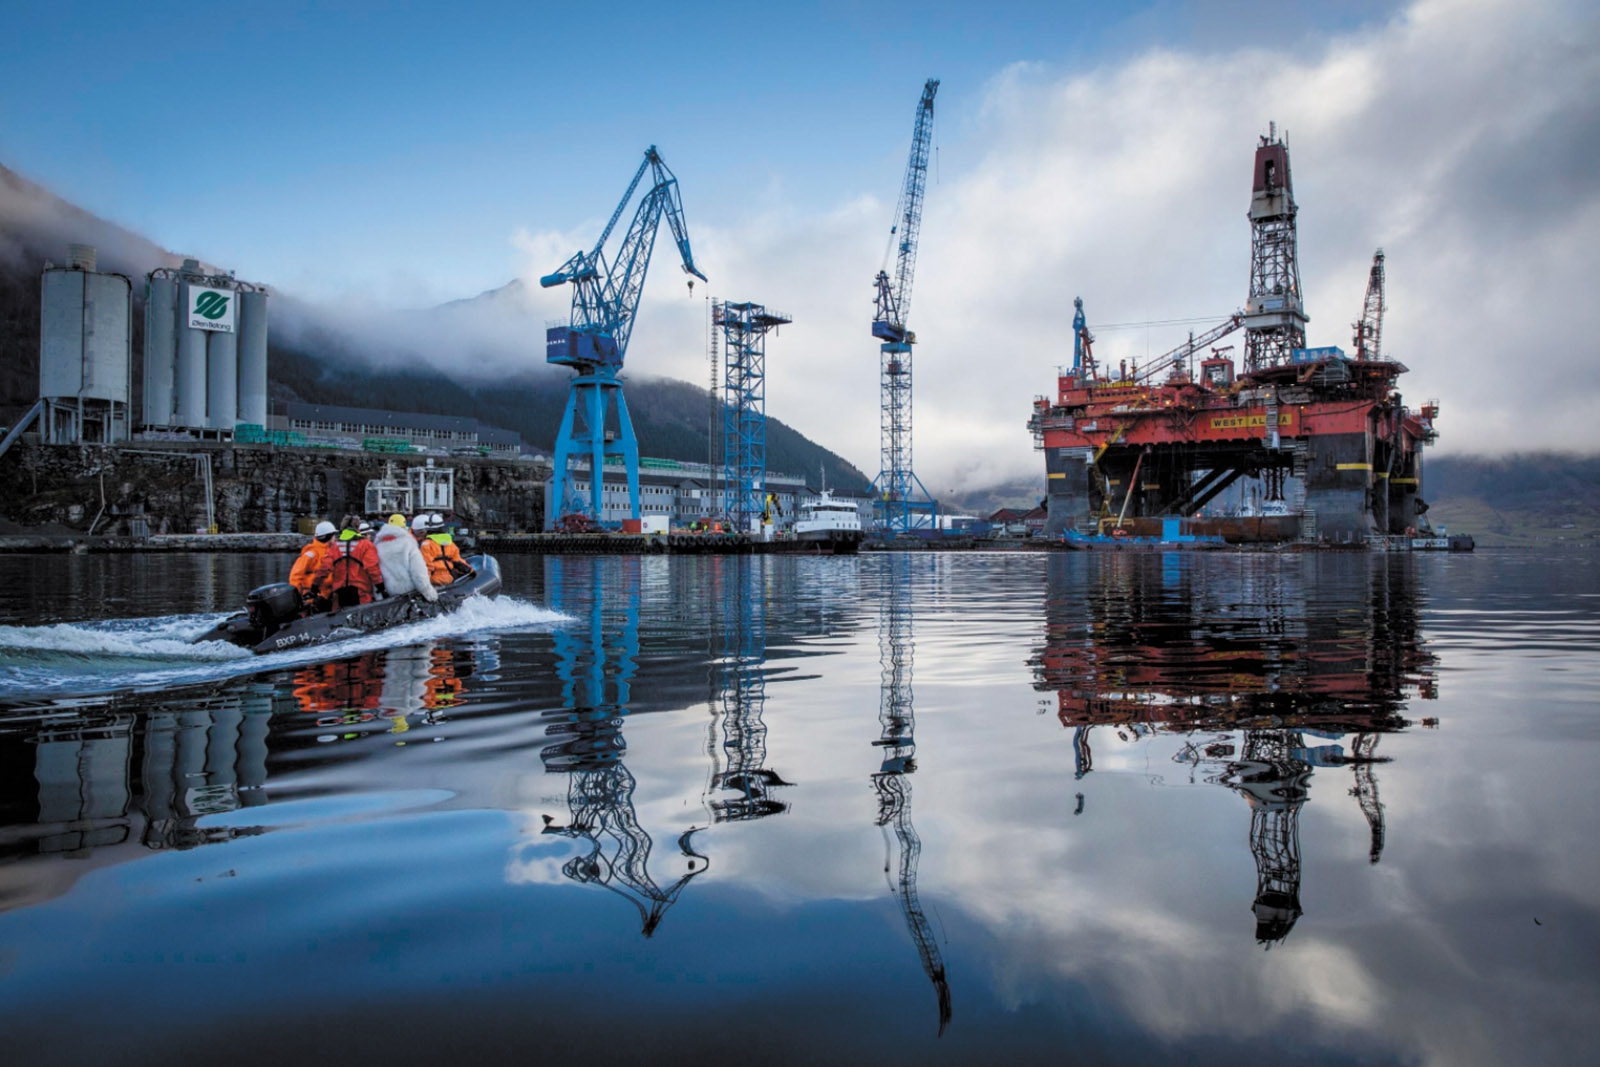 Greenpeace activists preparing to board an ExxonMobil oil rig in Norwegian waters to protest its plans to drill for oil in the Russian Arctic, March 2014